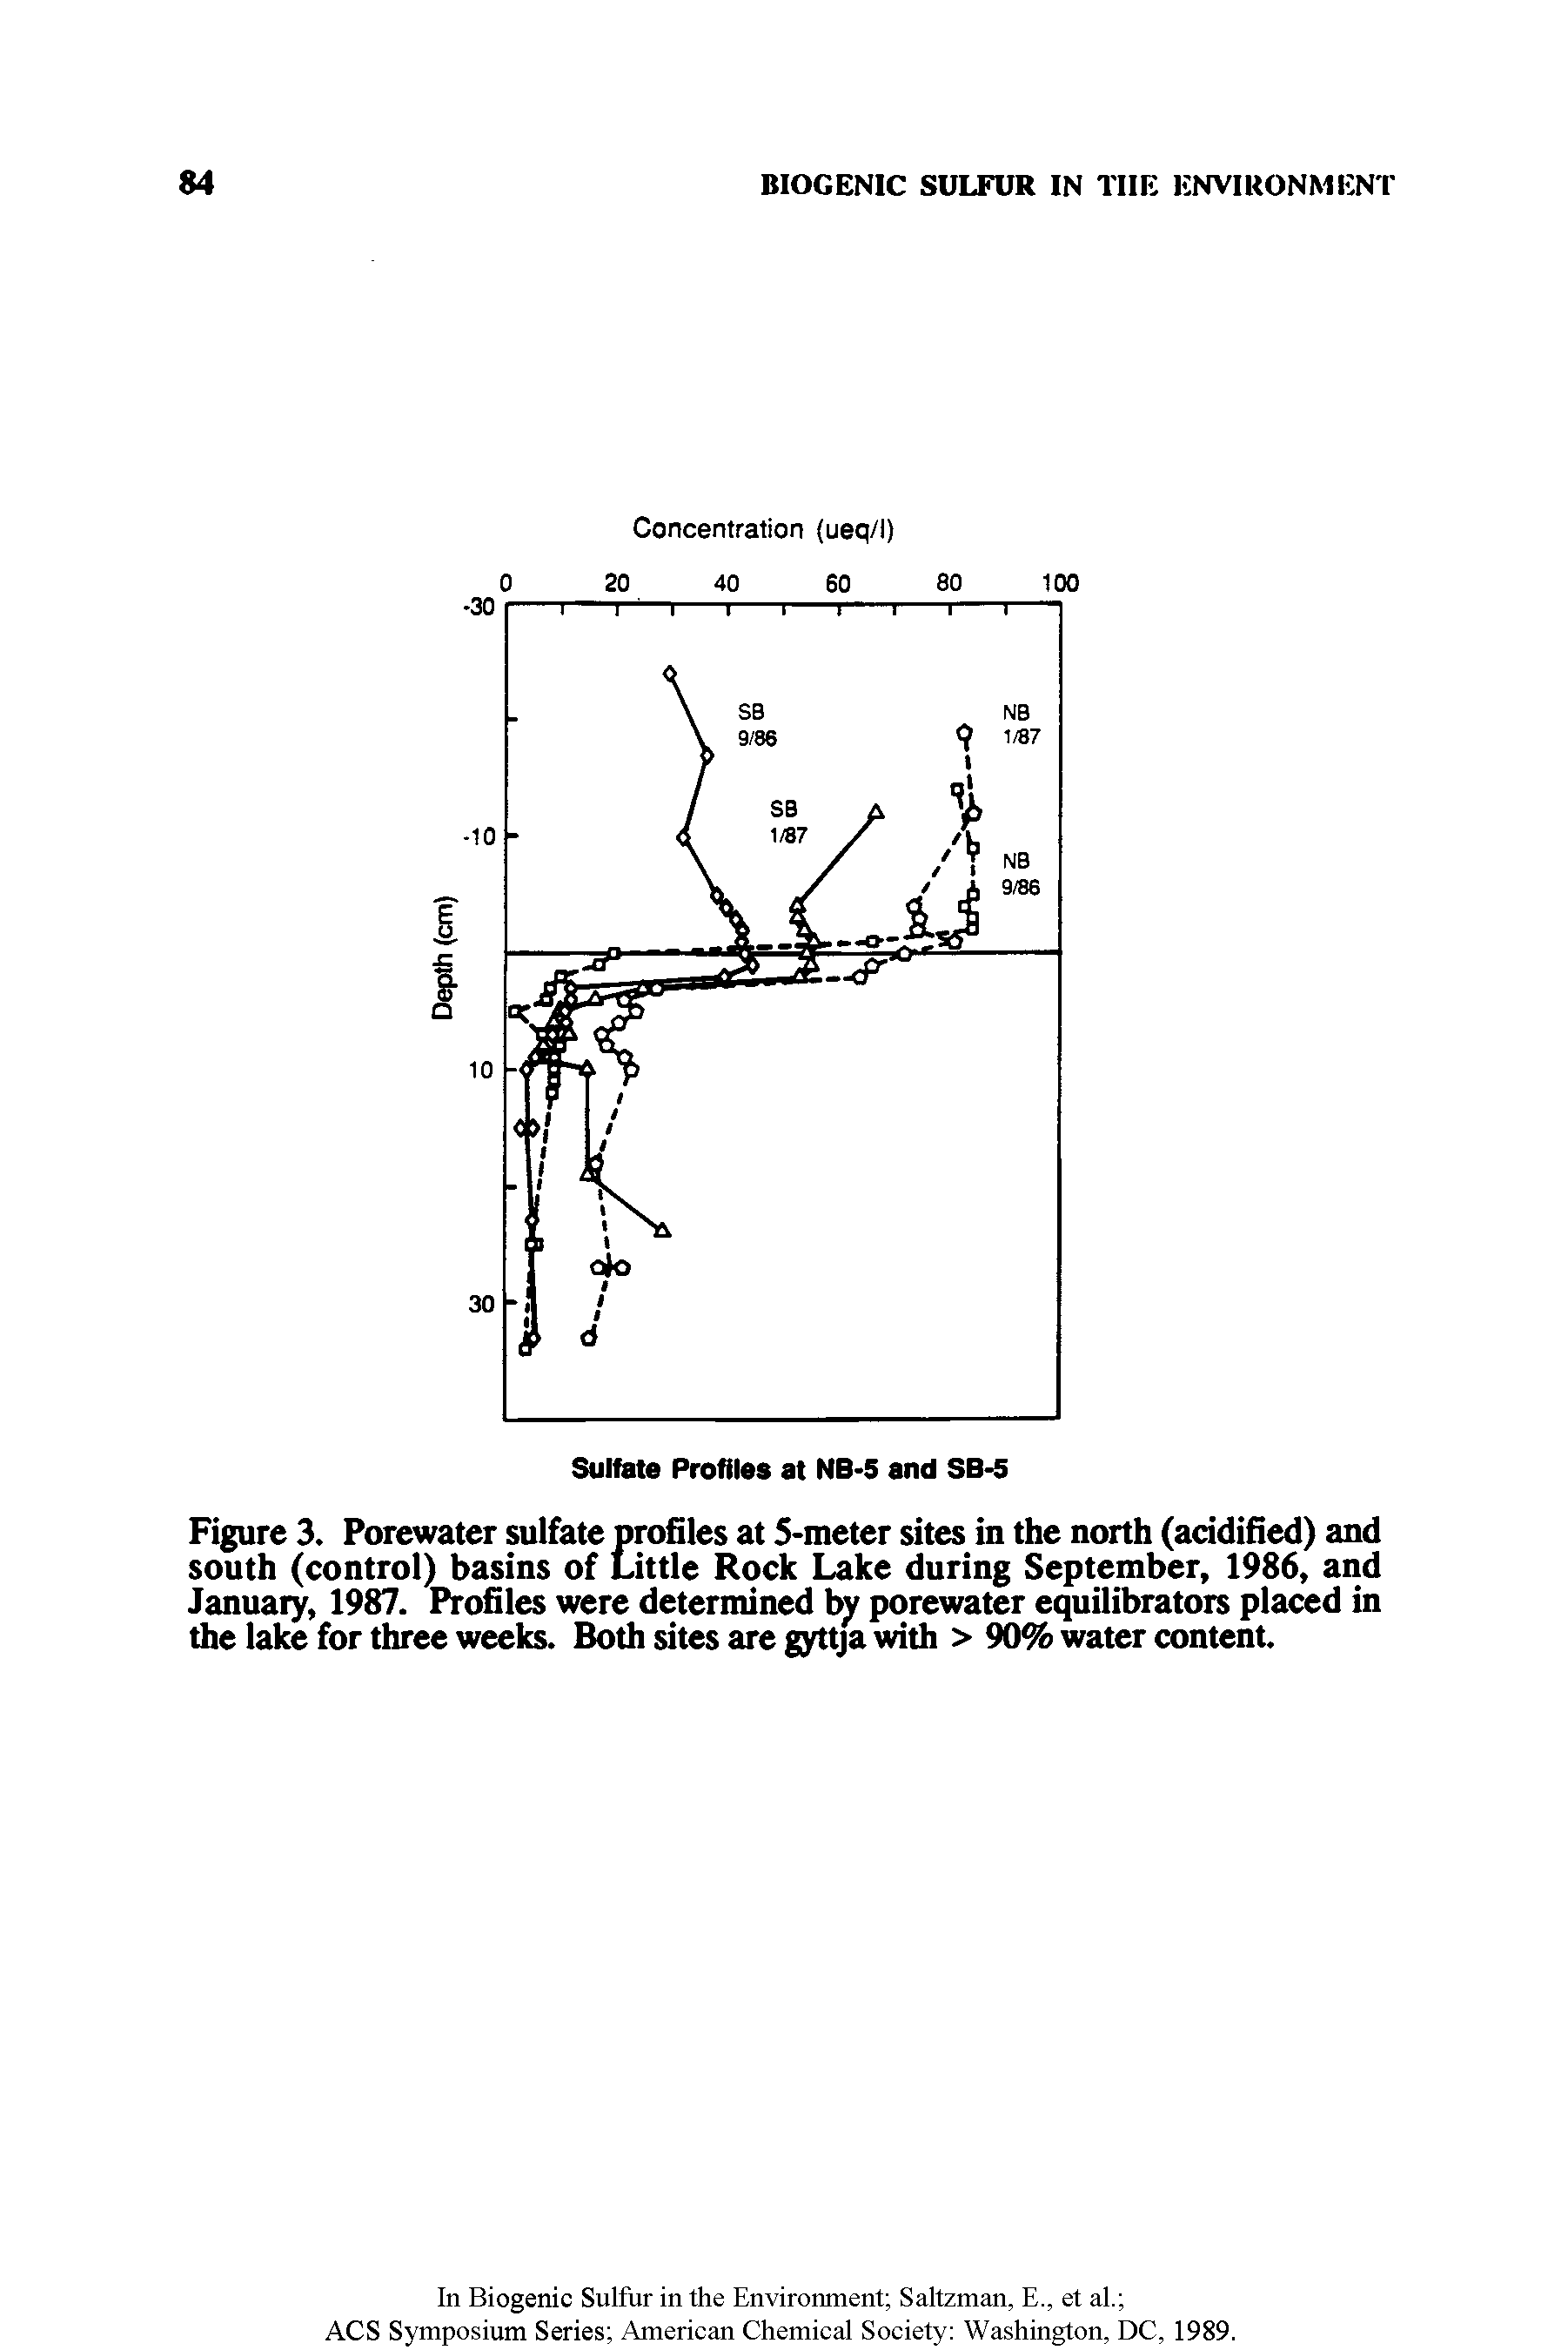 Figure 3. Porewater sulfate profiles at 5-meter sites in the north (acidified) and south (control) basins of Little Rock Lake during September, 1986, and January, 1987. Profiles were determined by porewater equilibrators placed in the lake for three weeks. Both sites are gyttja with > 90% water content.